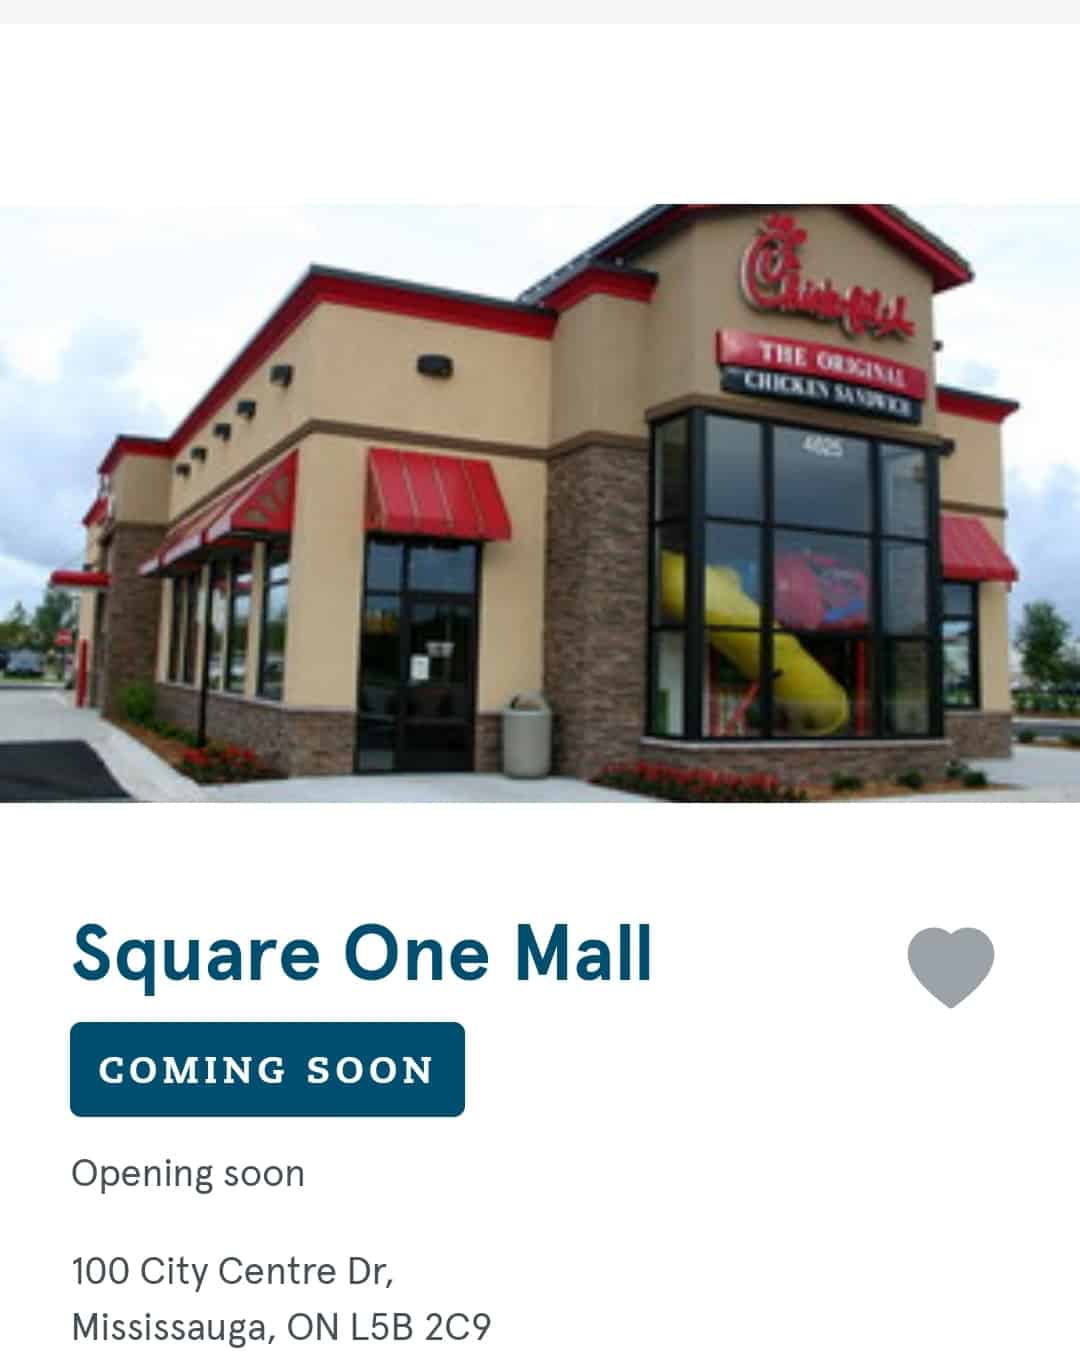 chick-fil-a square one